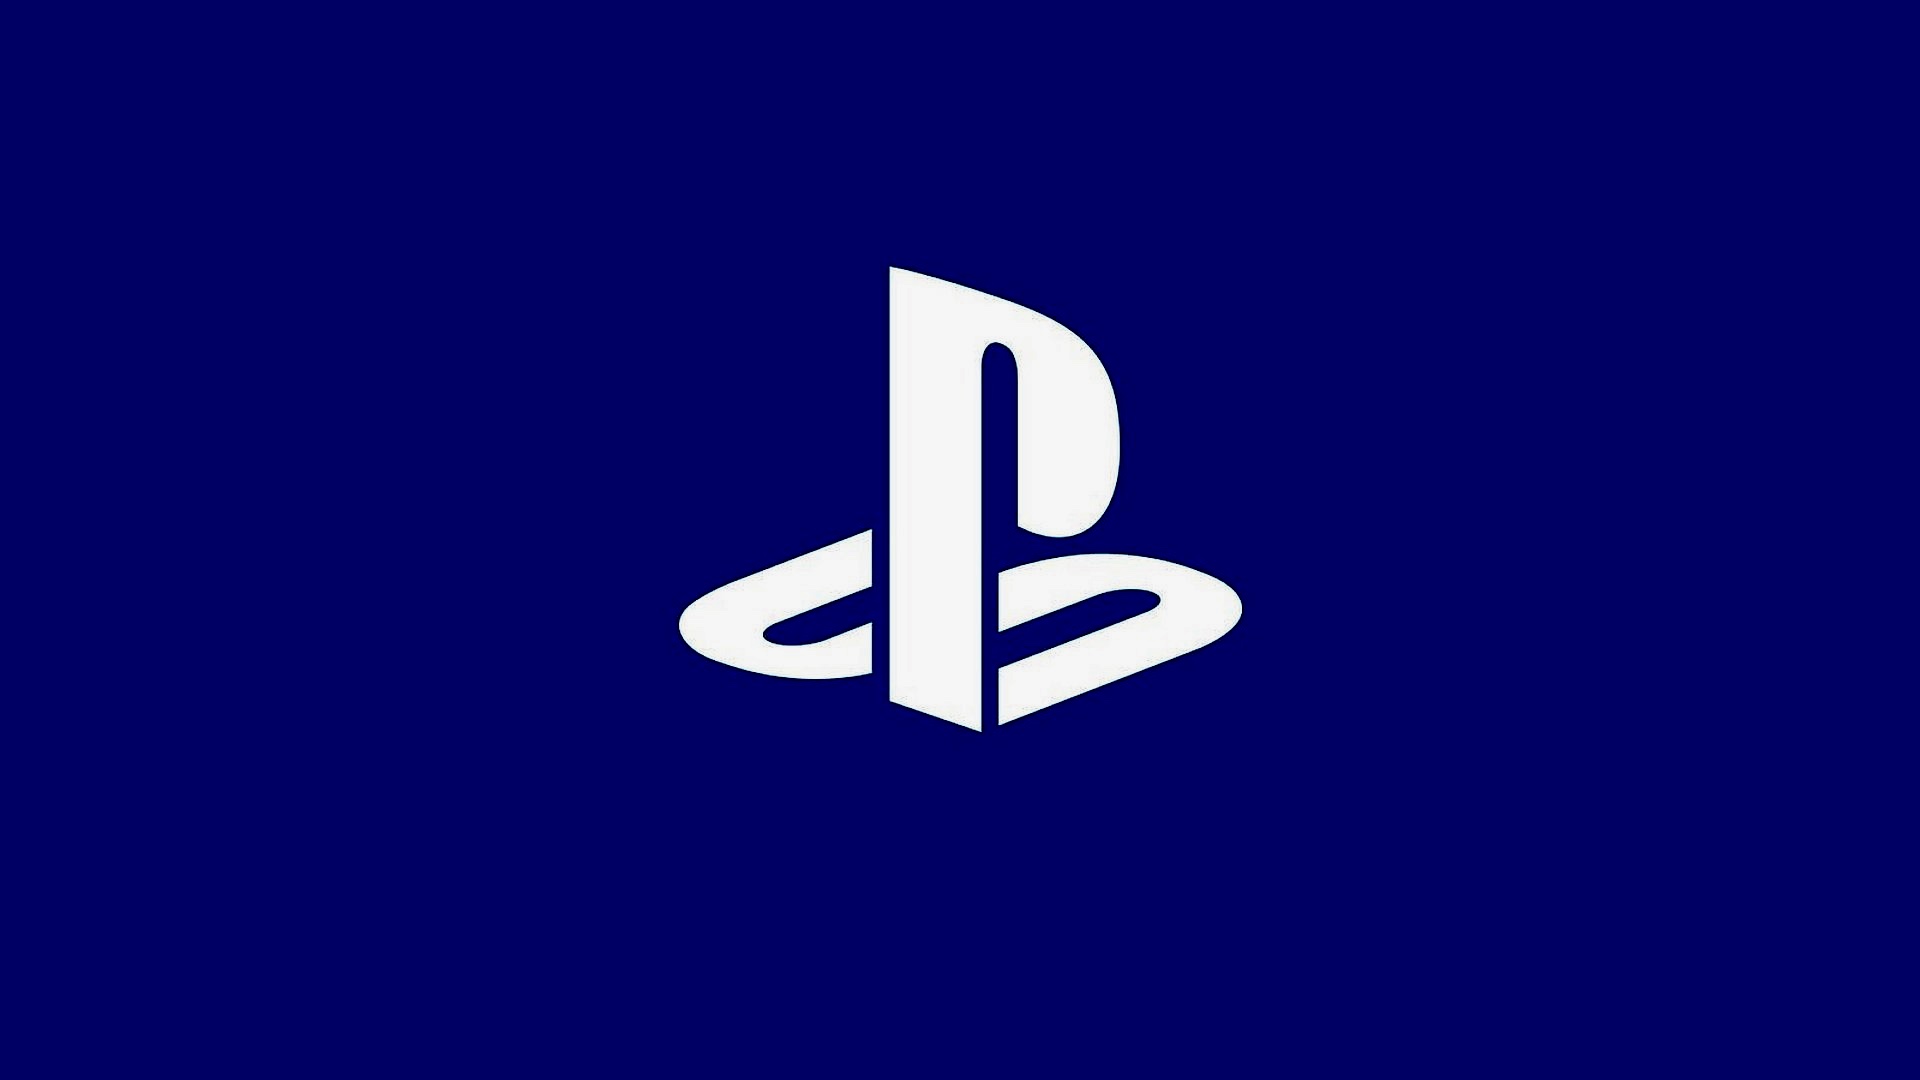 Sony Files Patent for Real-Time In-Game Assistance from “Experts”